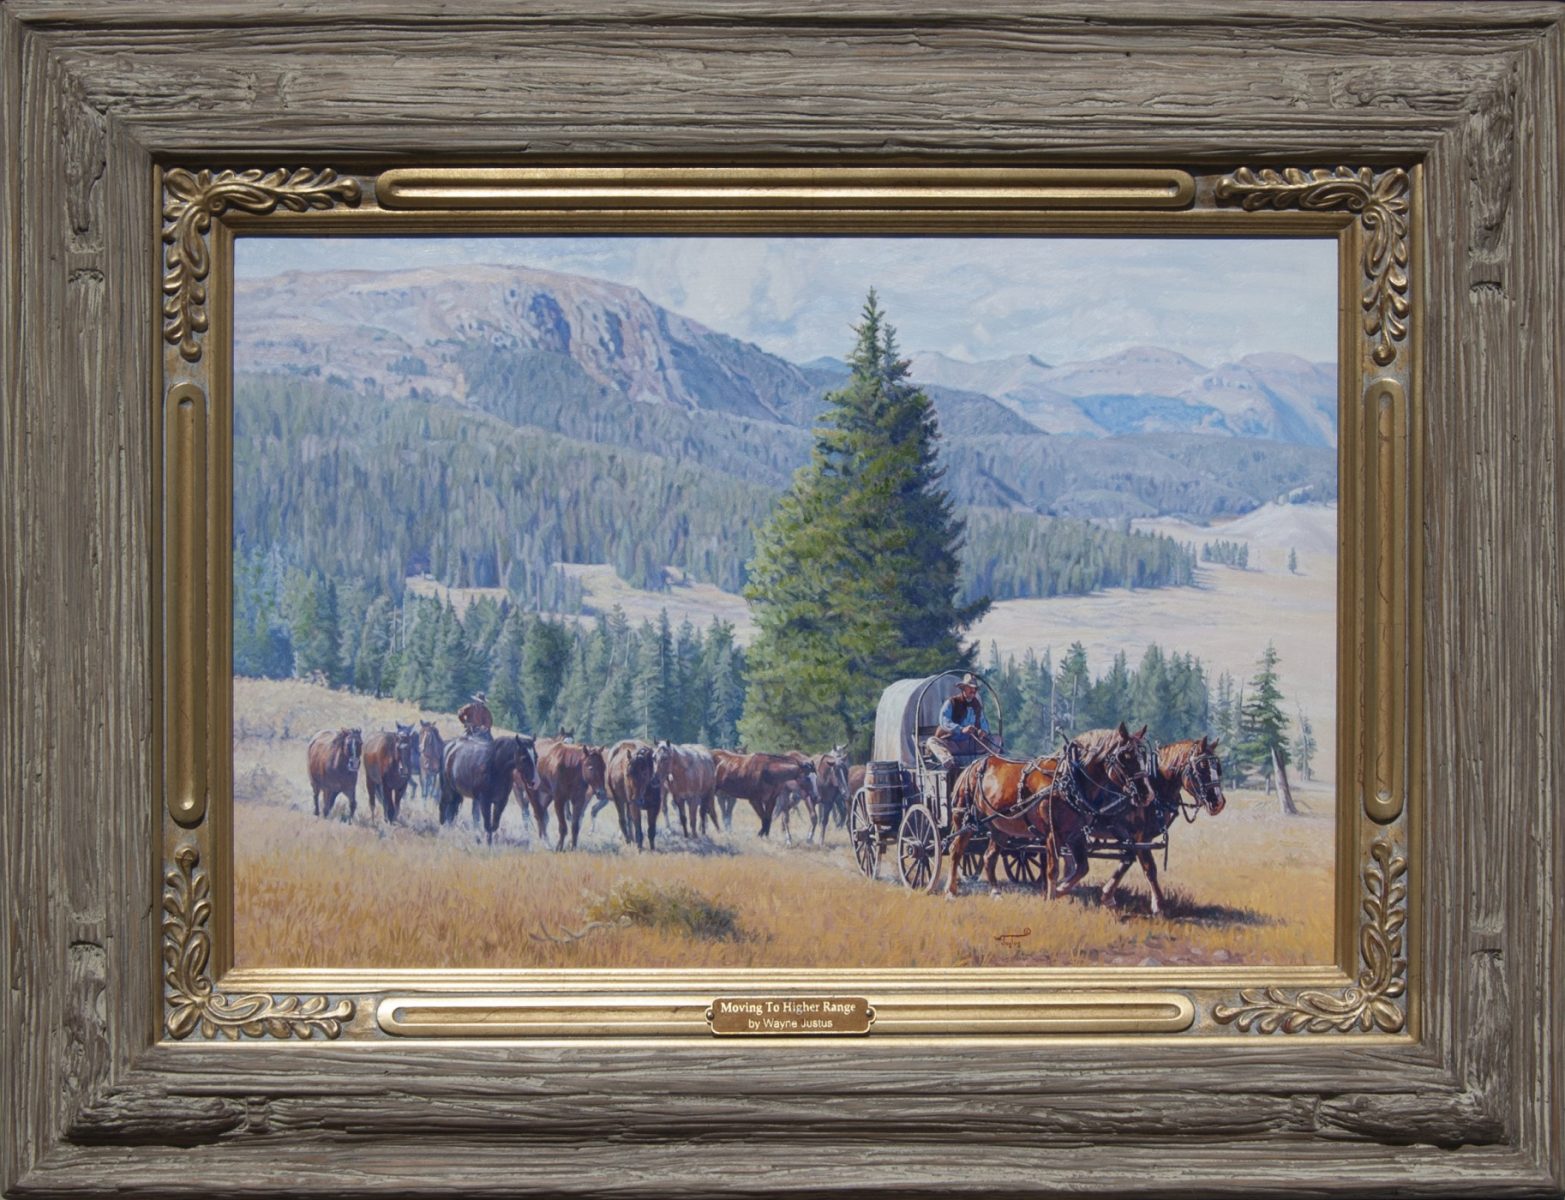 Painting of a covered wagon procession by artist Wayne Justus